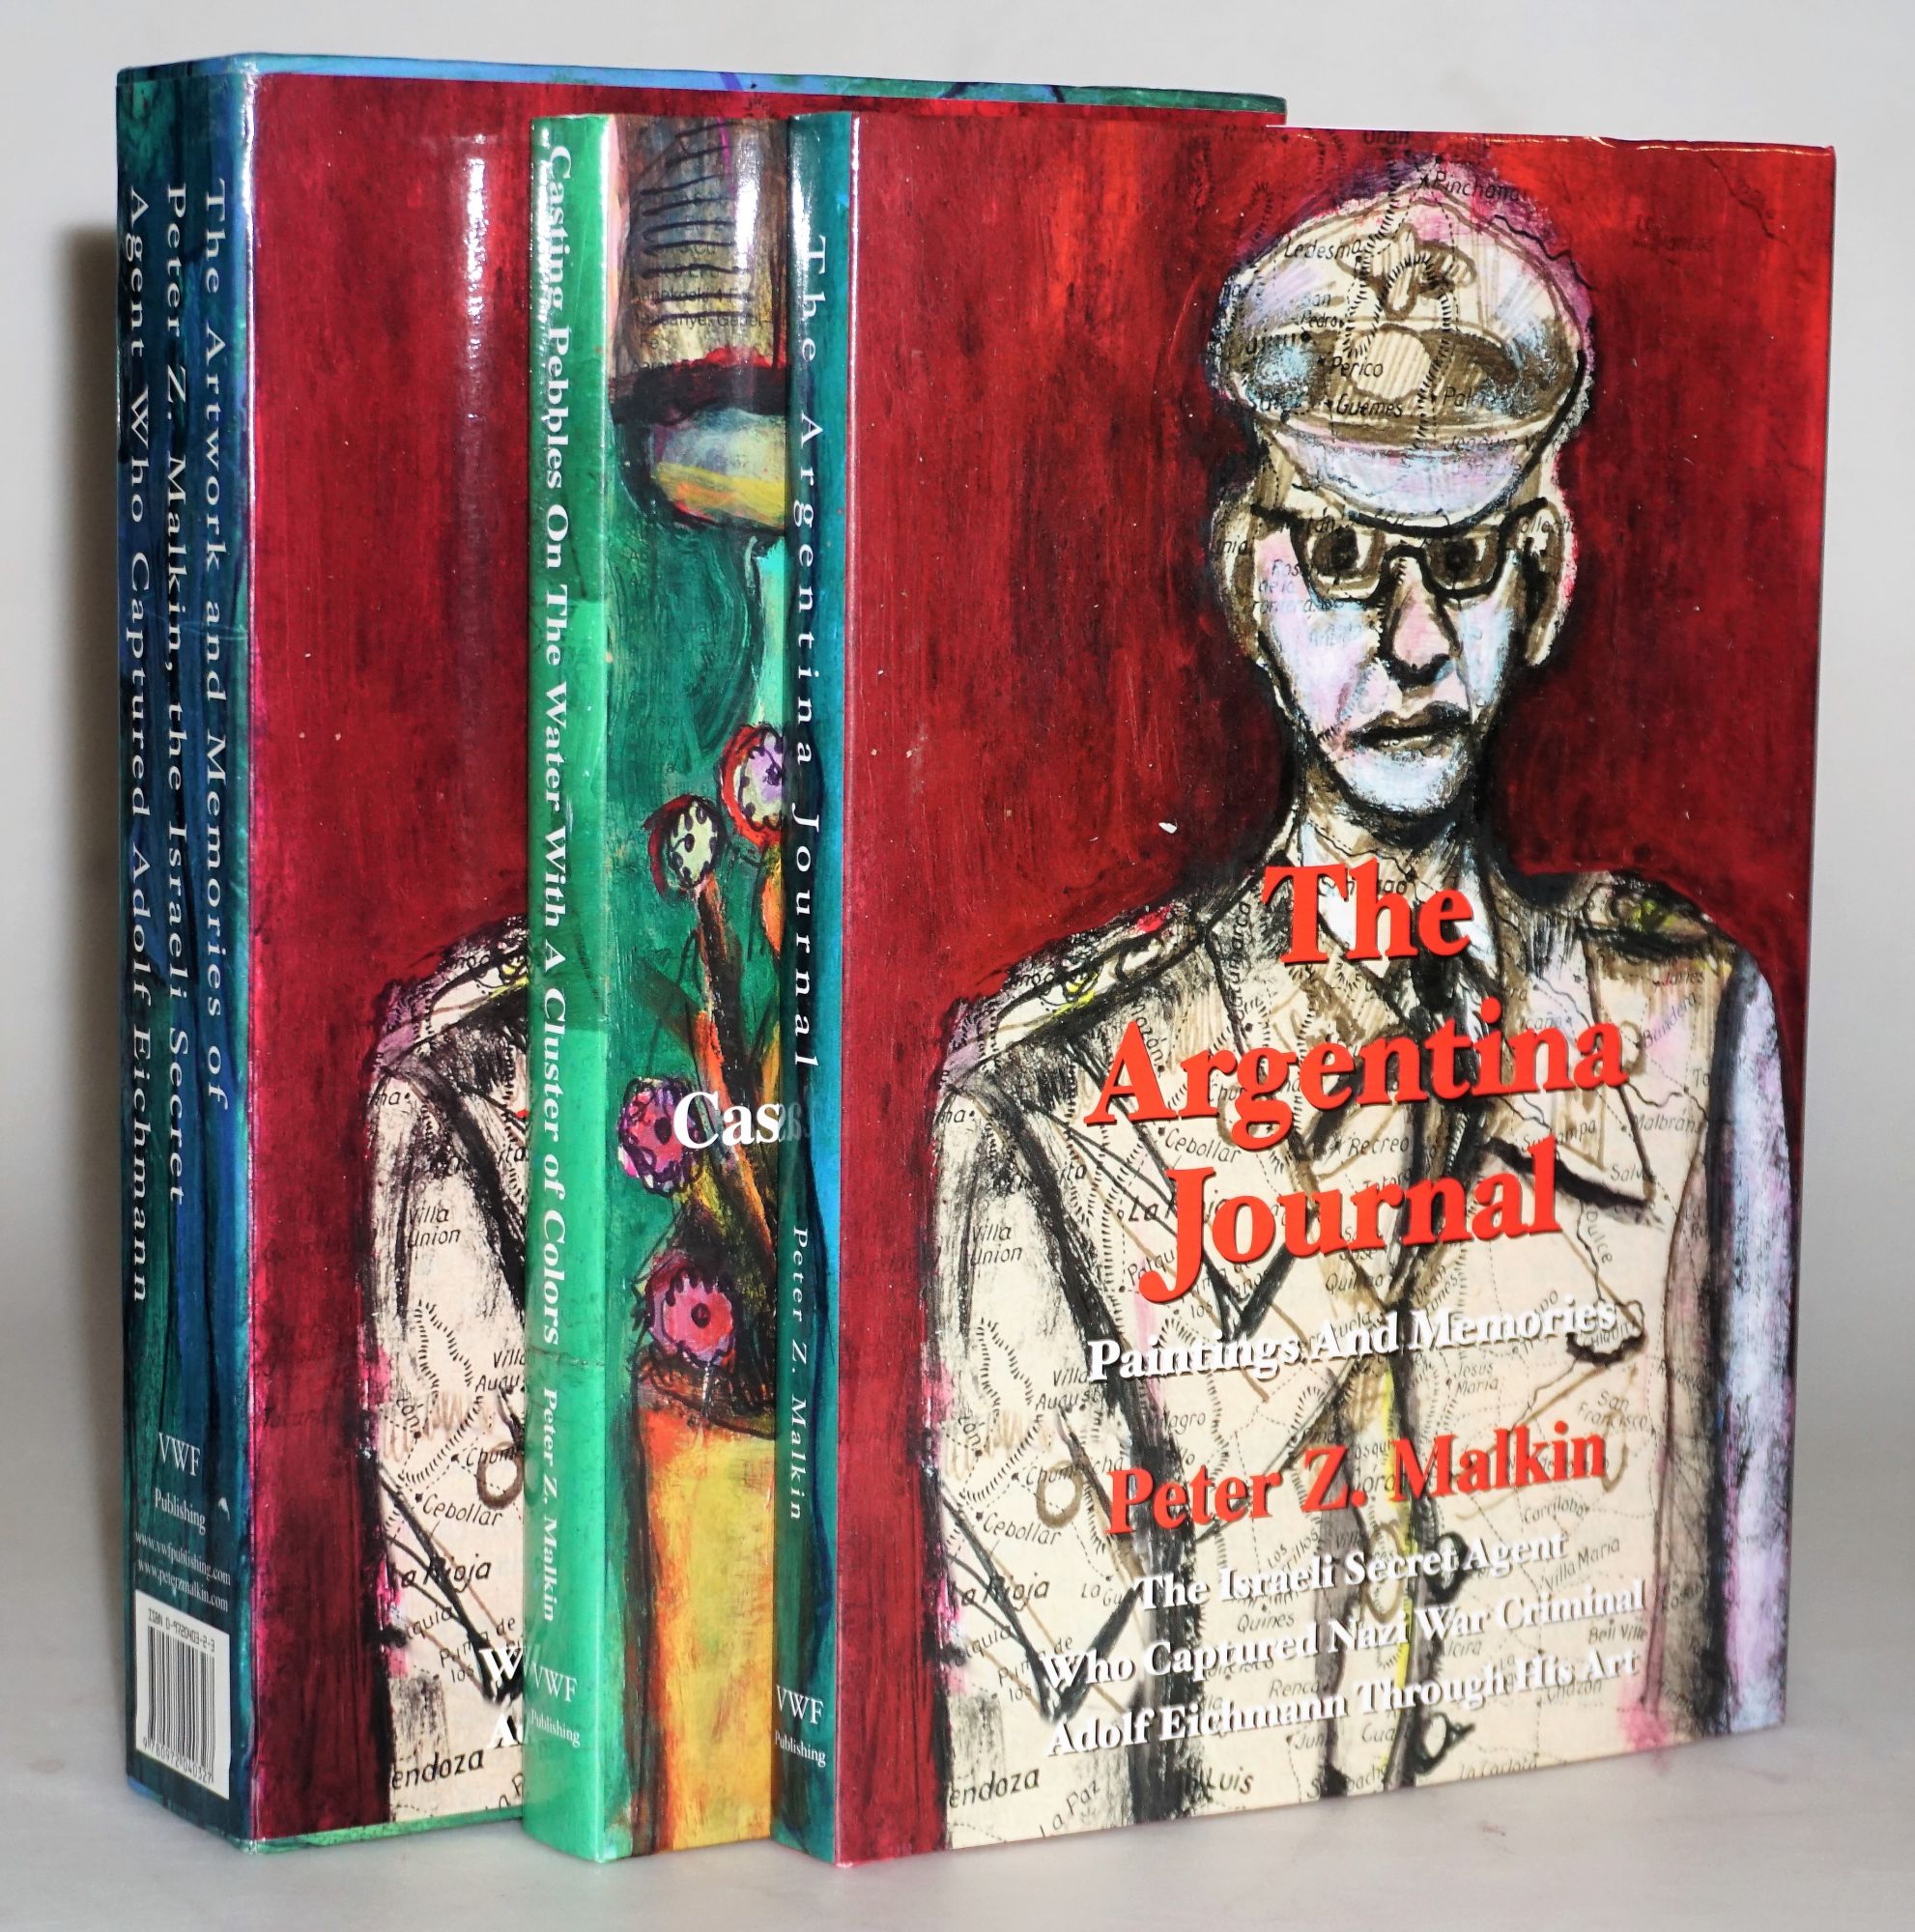 The Argentina Journal: Paintings and Memories: [with] Casting Pebbles on the Water [With] a Cluster of Colors: The Artworks and Memories of Peter Z. Malkin, The Israeli Secret Agent Who Captured Nazi War Criminal Adolf Eichmann Through His Art [2 volumes]